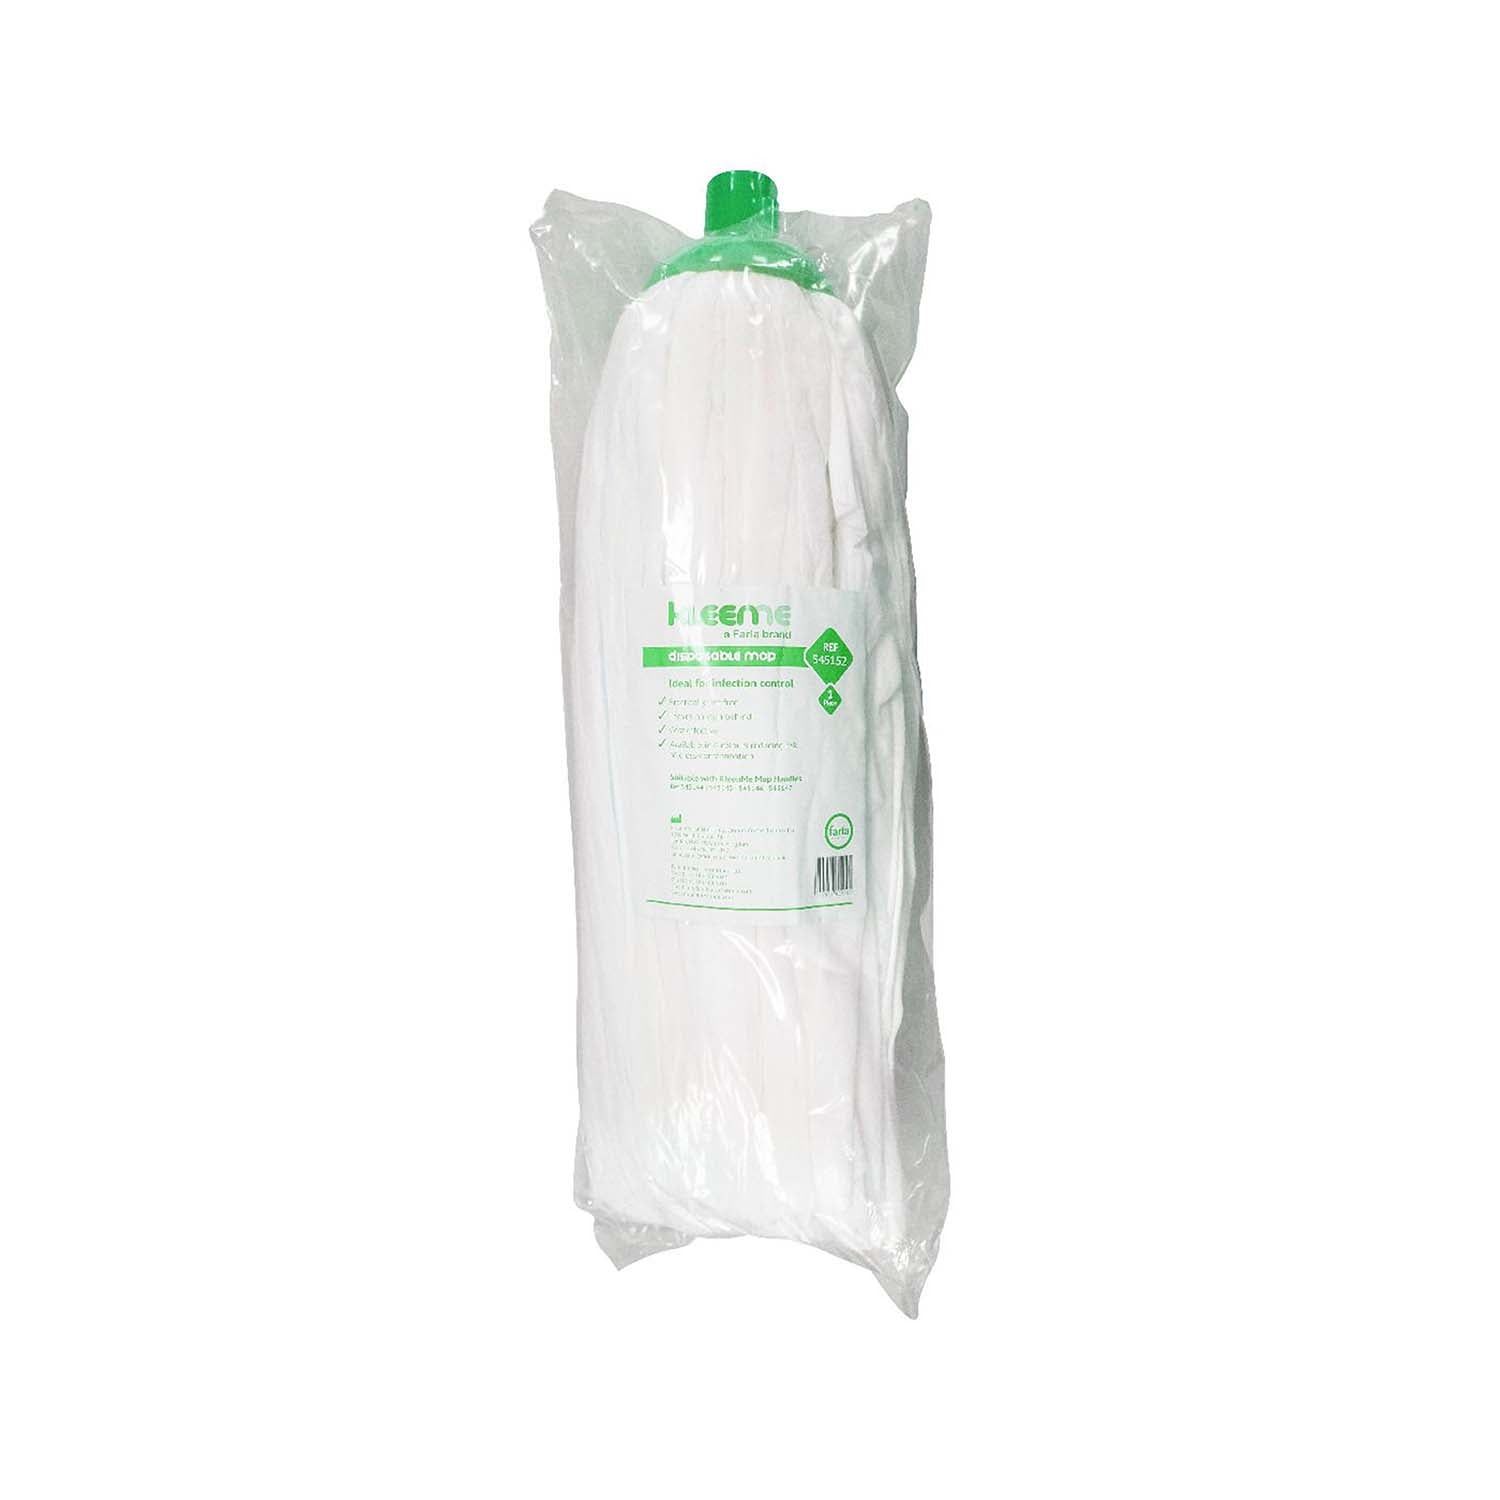 KleenMe Disposable Mop | Green